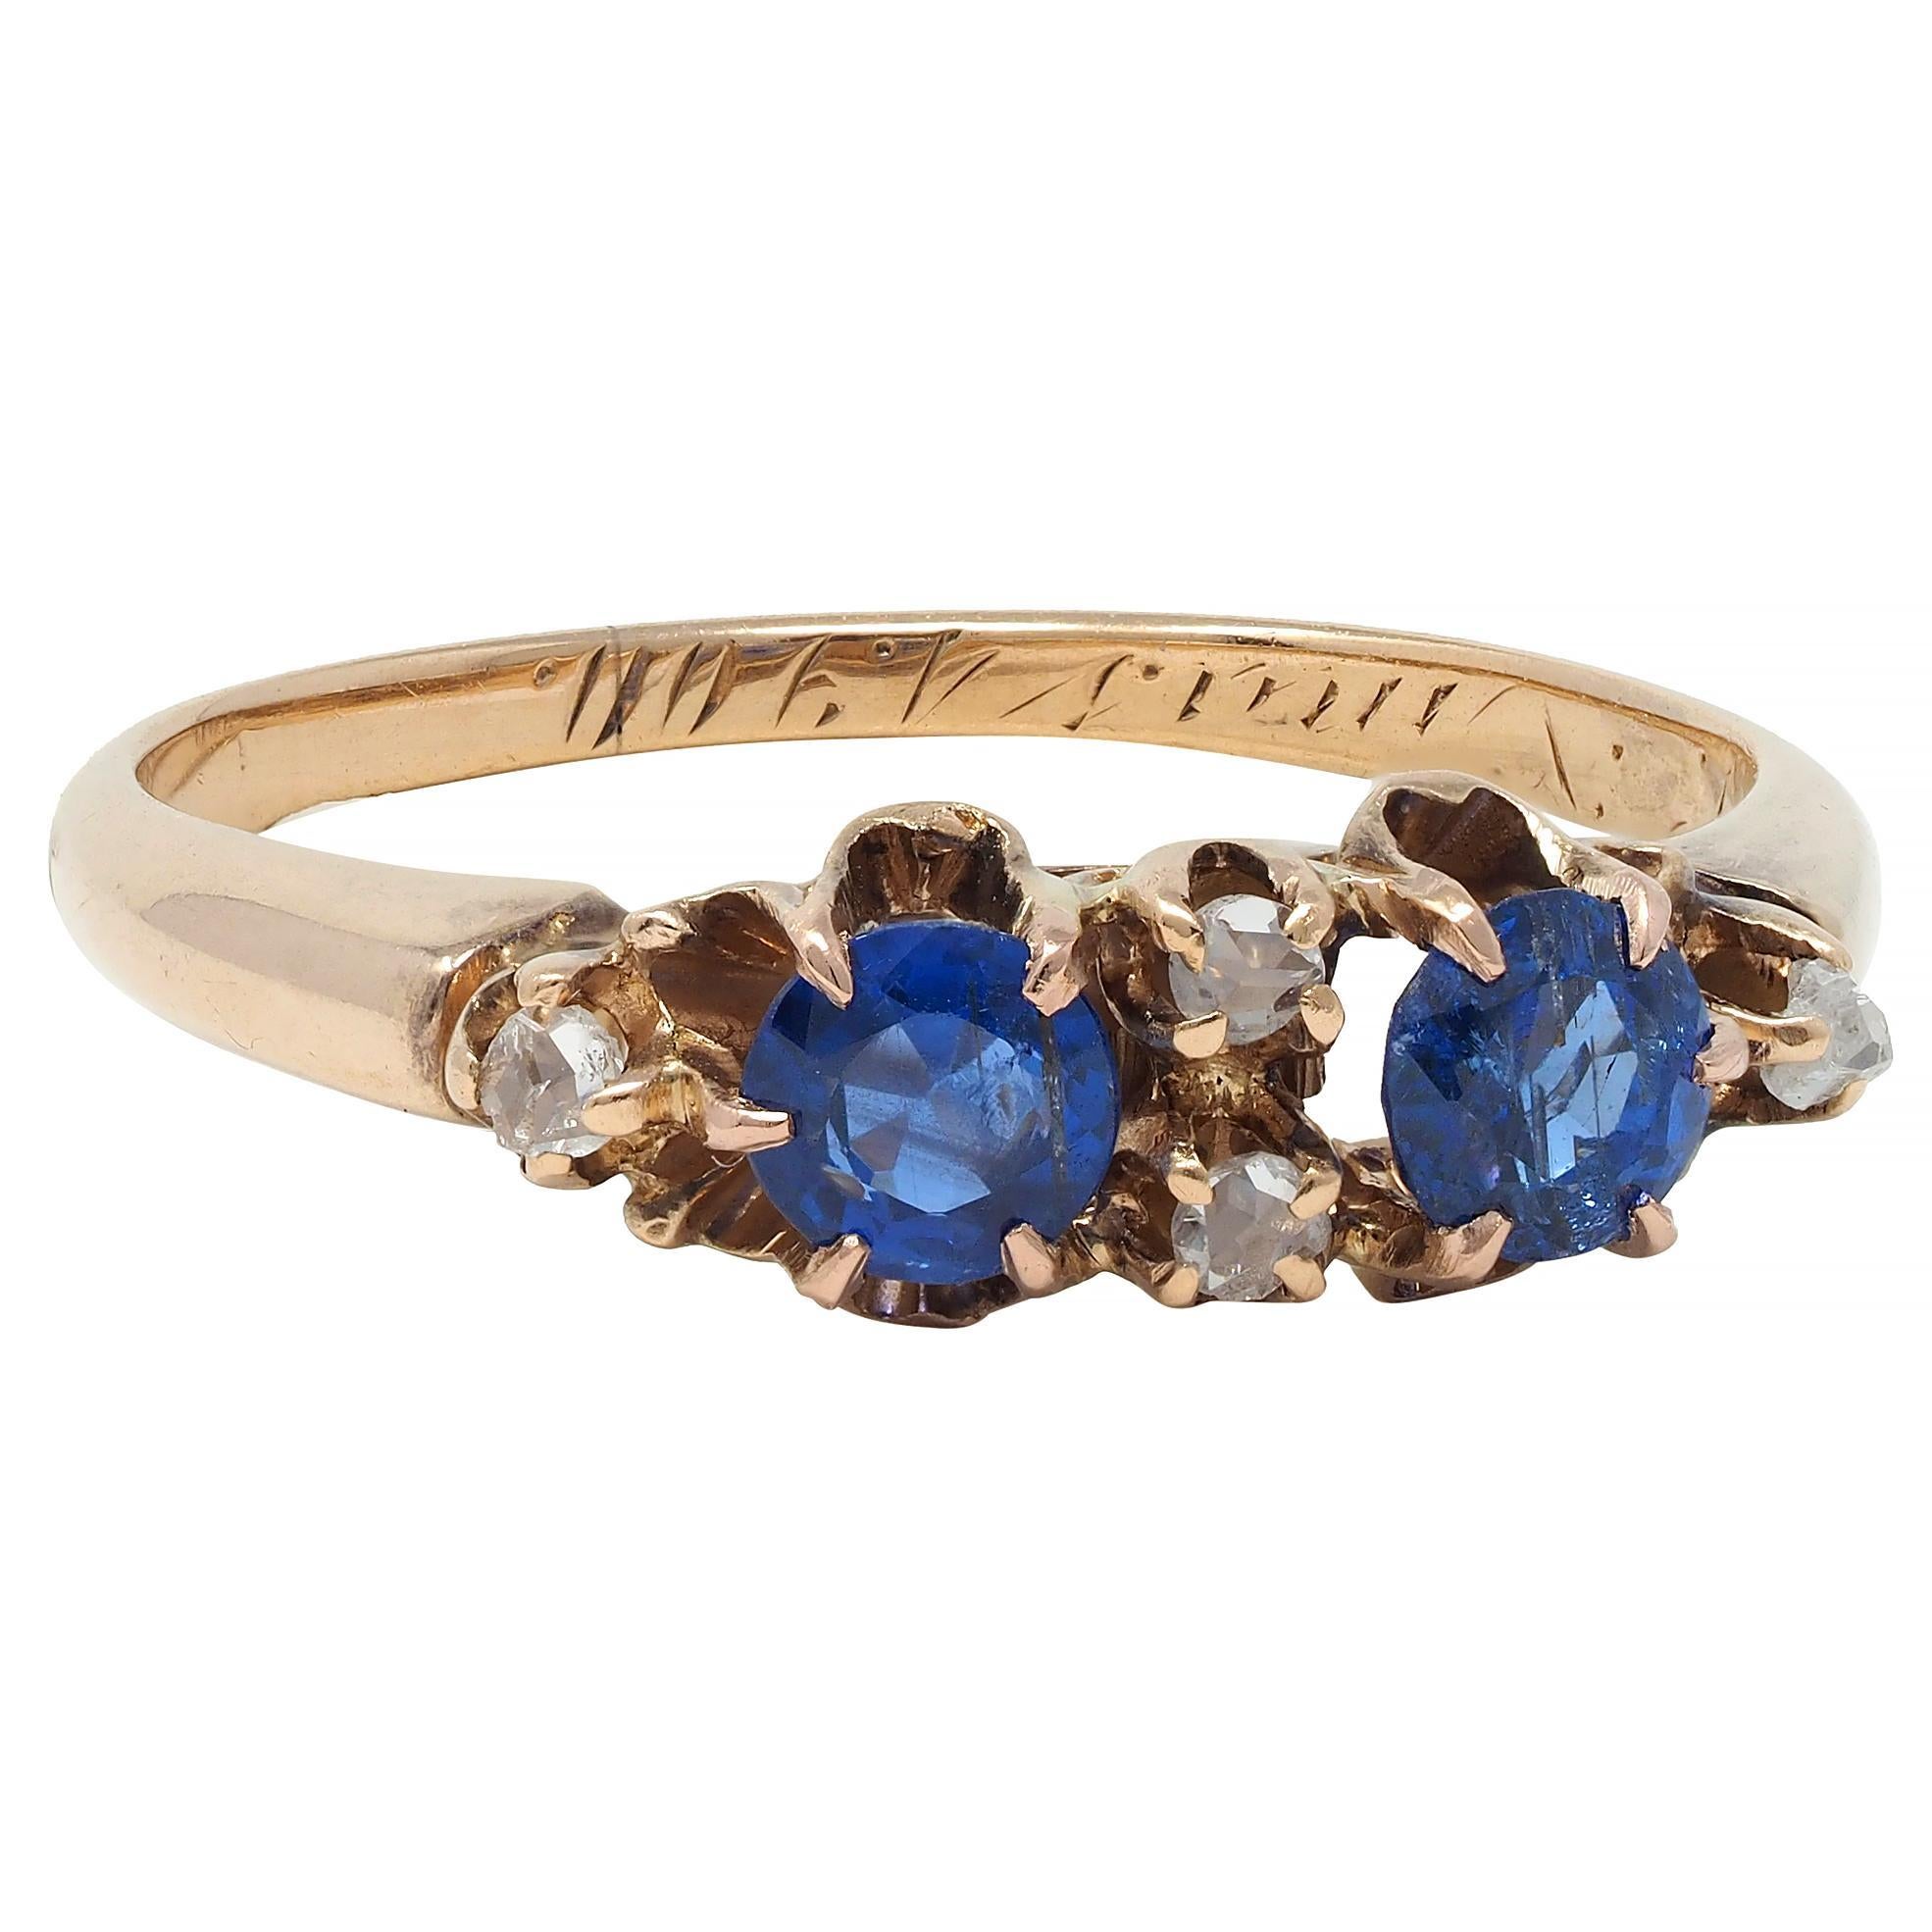 Featuring two round cut sapphires weighing approximately 0.40 carat total 
Transparent medium blue in color - alternating with rose cut diamonds
Weighing approximately 0.04 carat total - eye clean and bright
All set east to west with belcher style